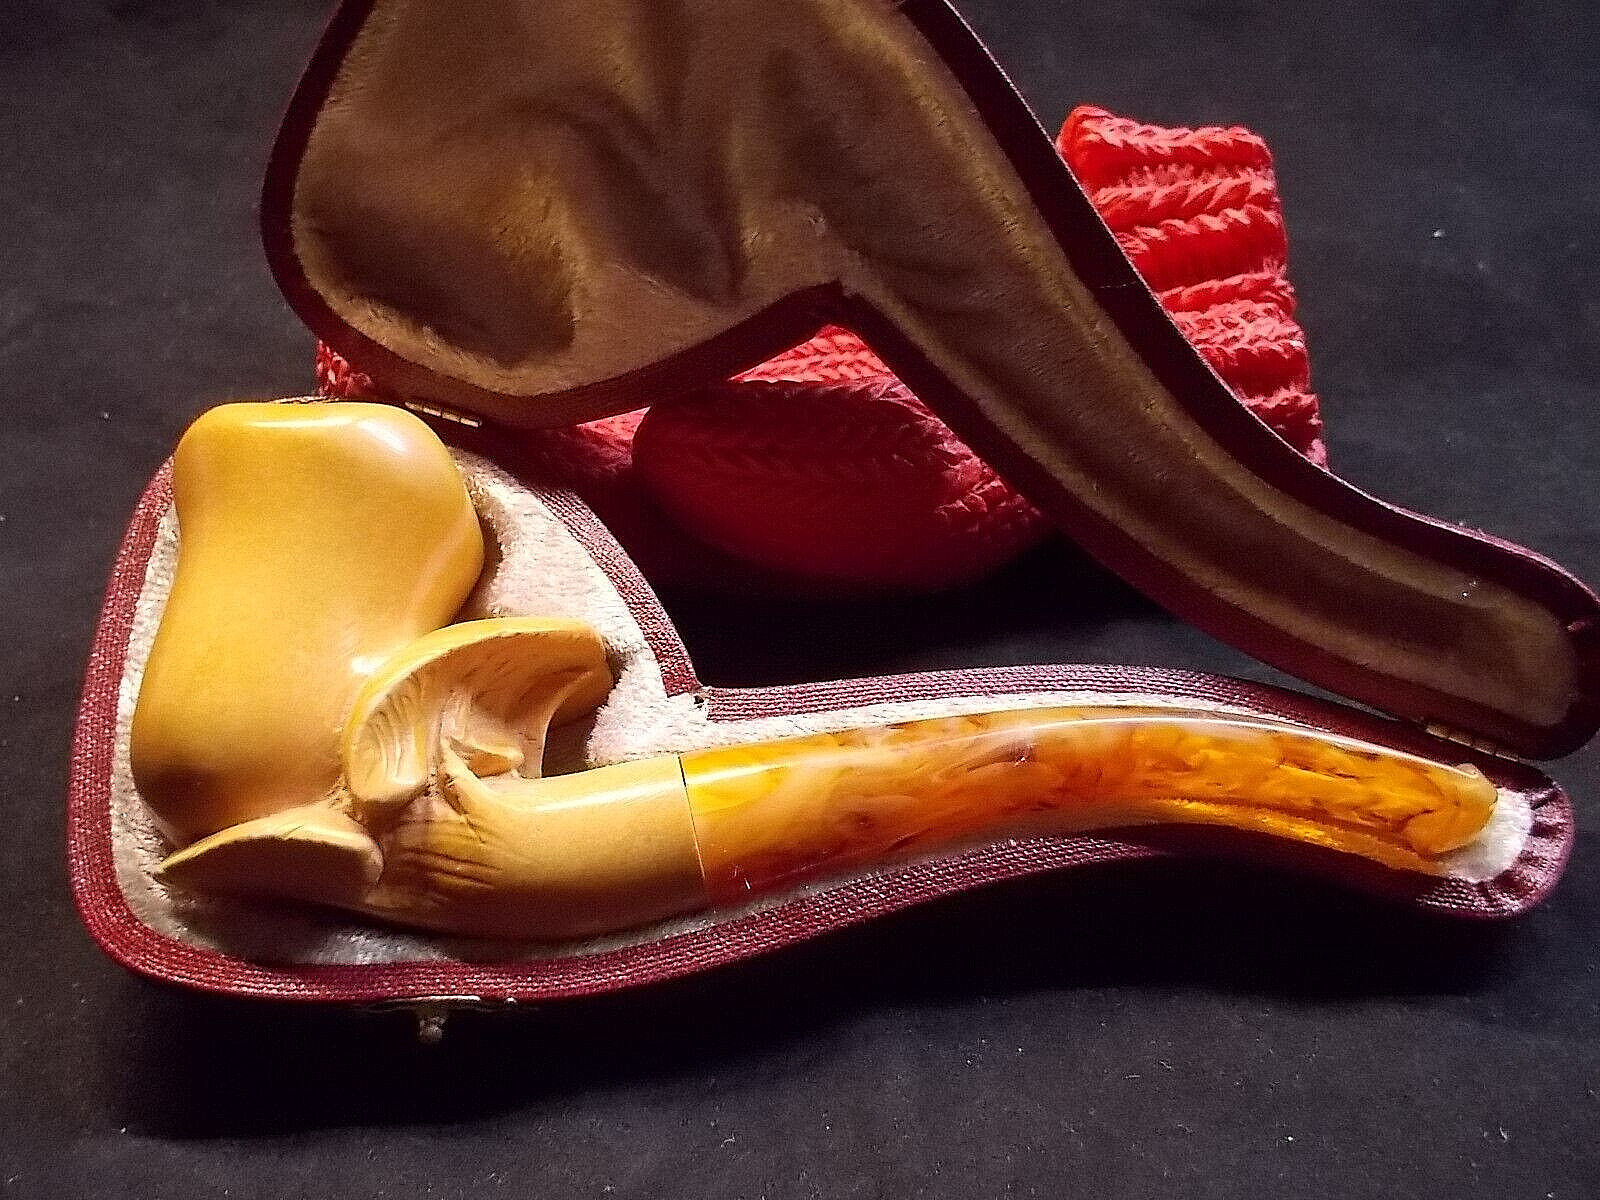 NEW UNSMOKED MEERSCHAUM SMALL FREE HAND CARVED BOWL SMOKING PIPE FITTED CASE